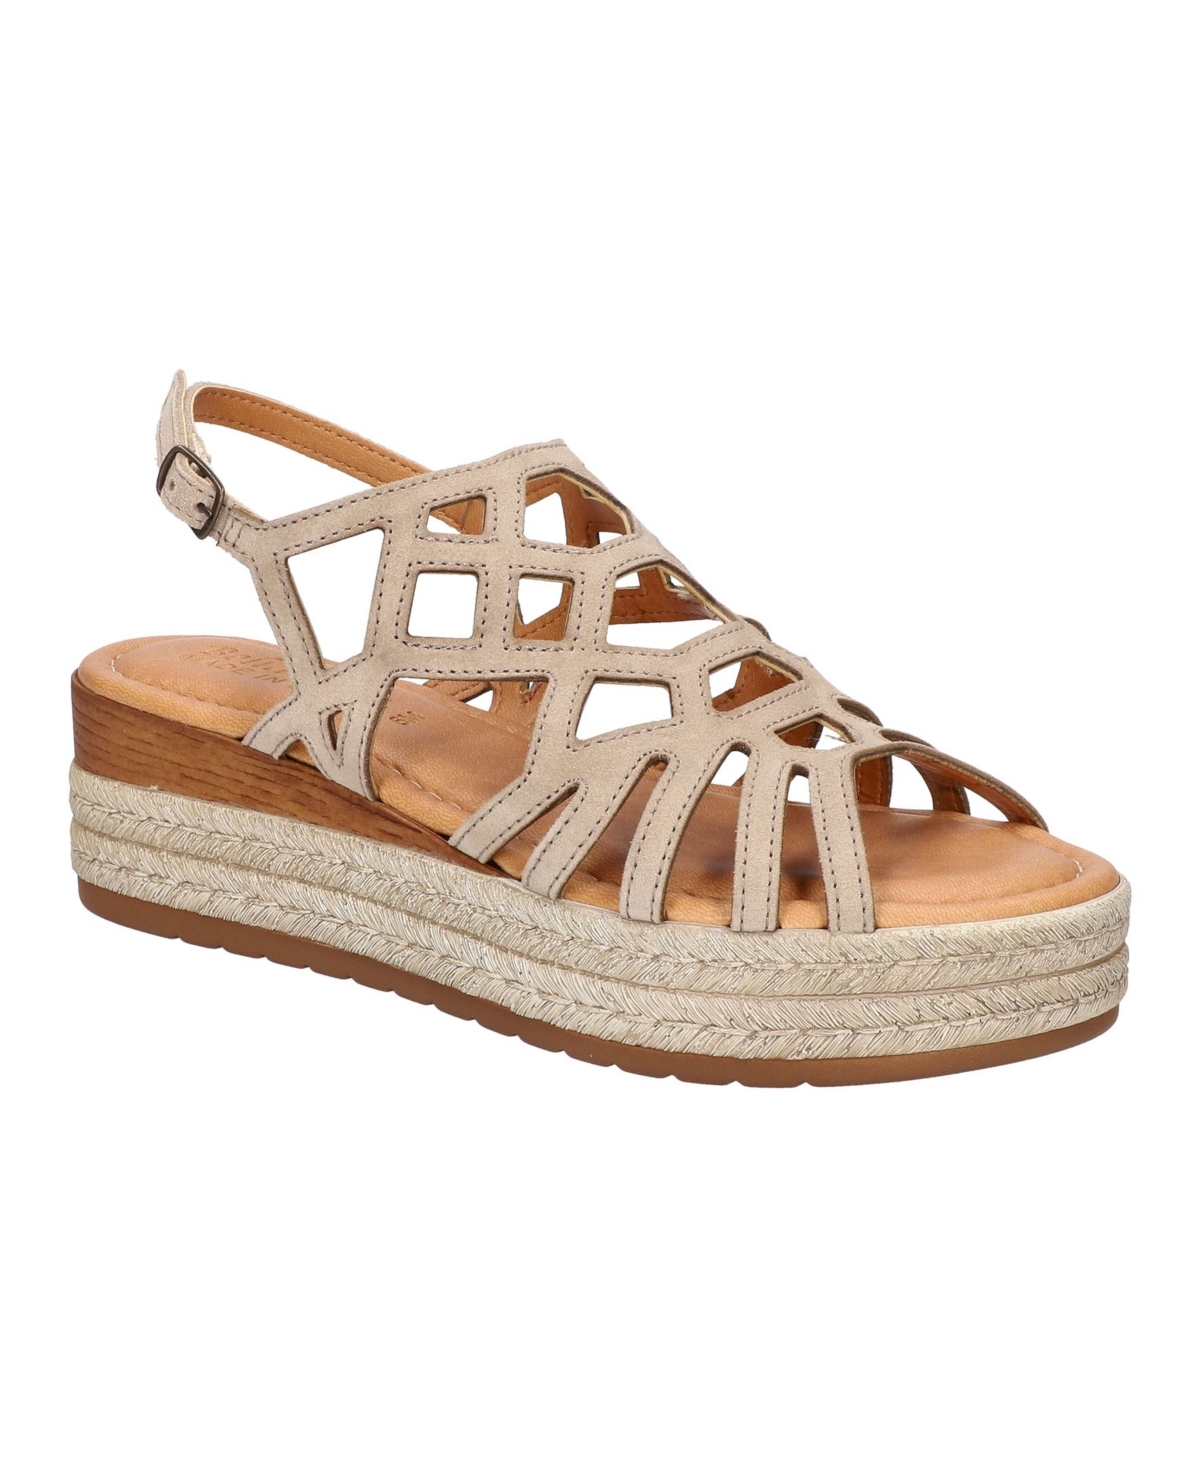 Women's Zip-Italy Wedge Sandals - Stone Suede Leather